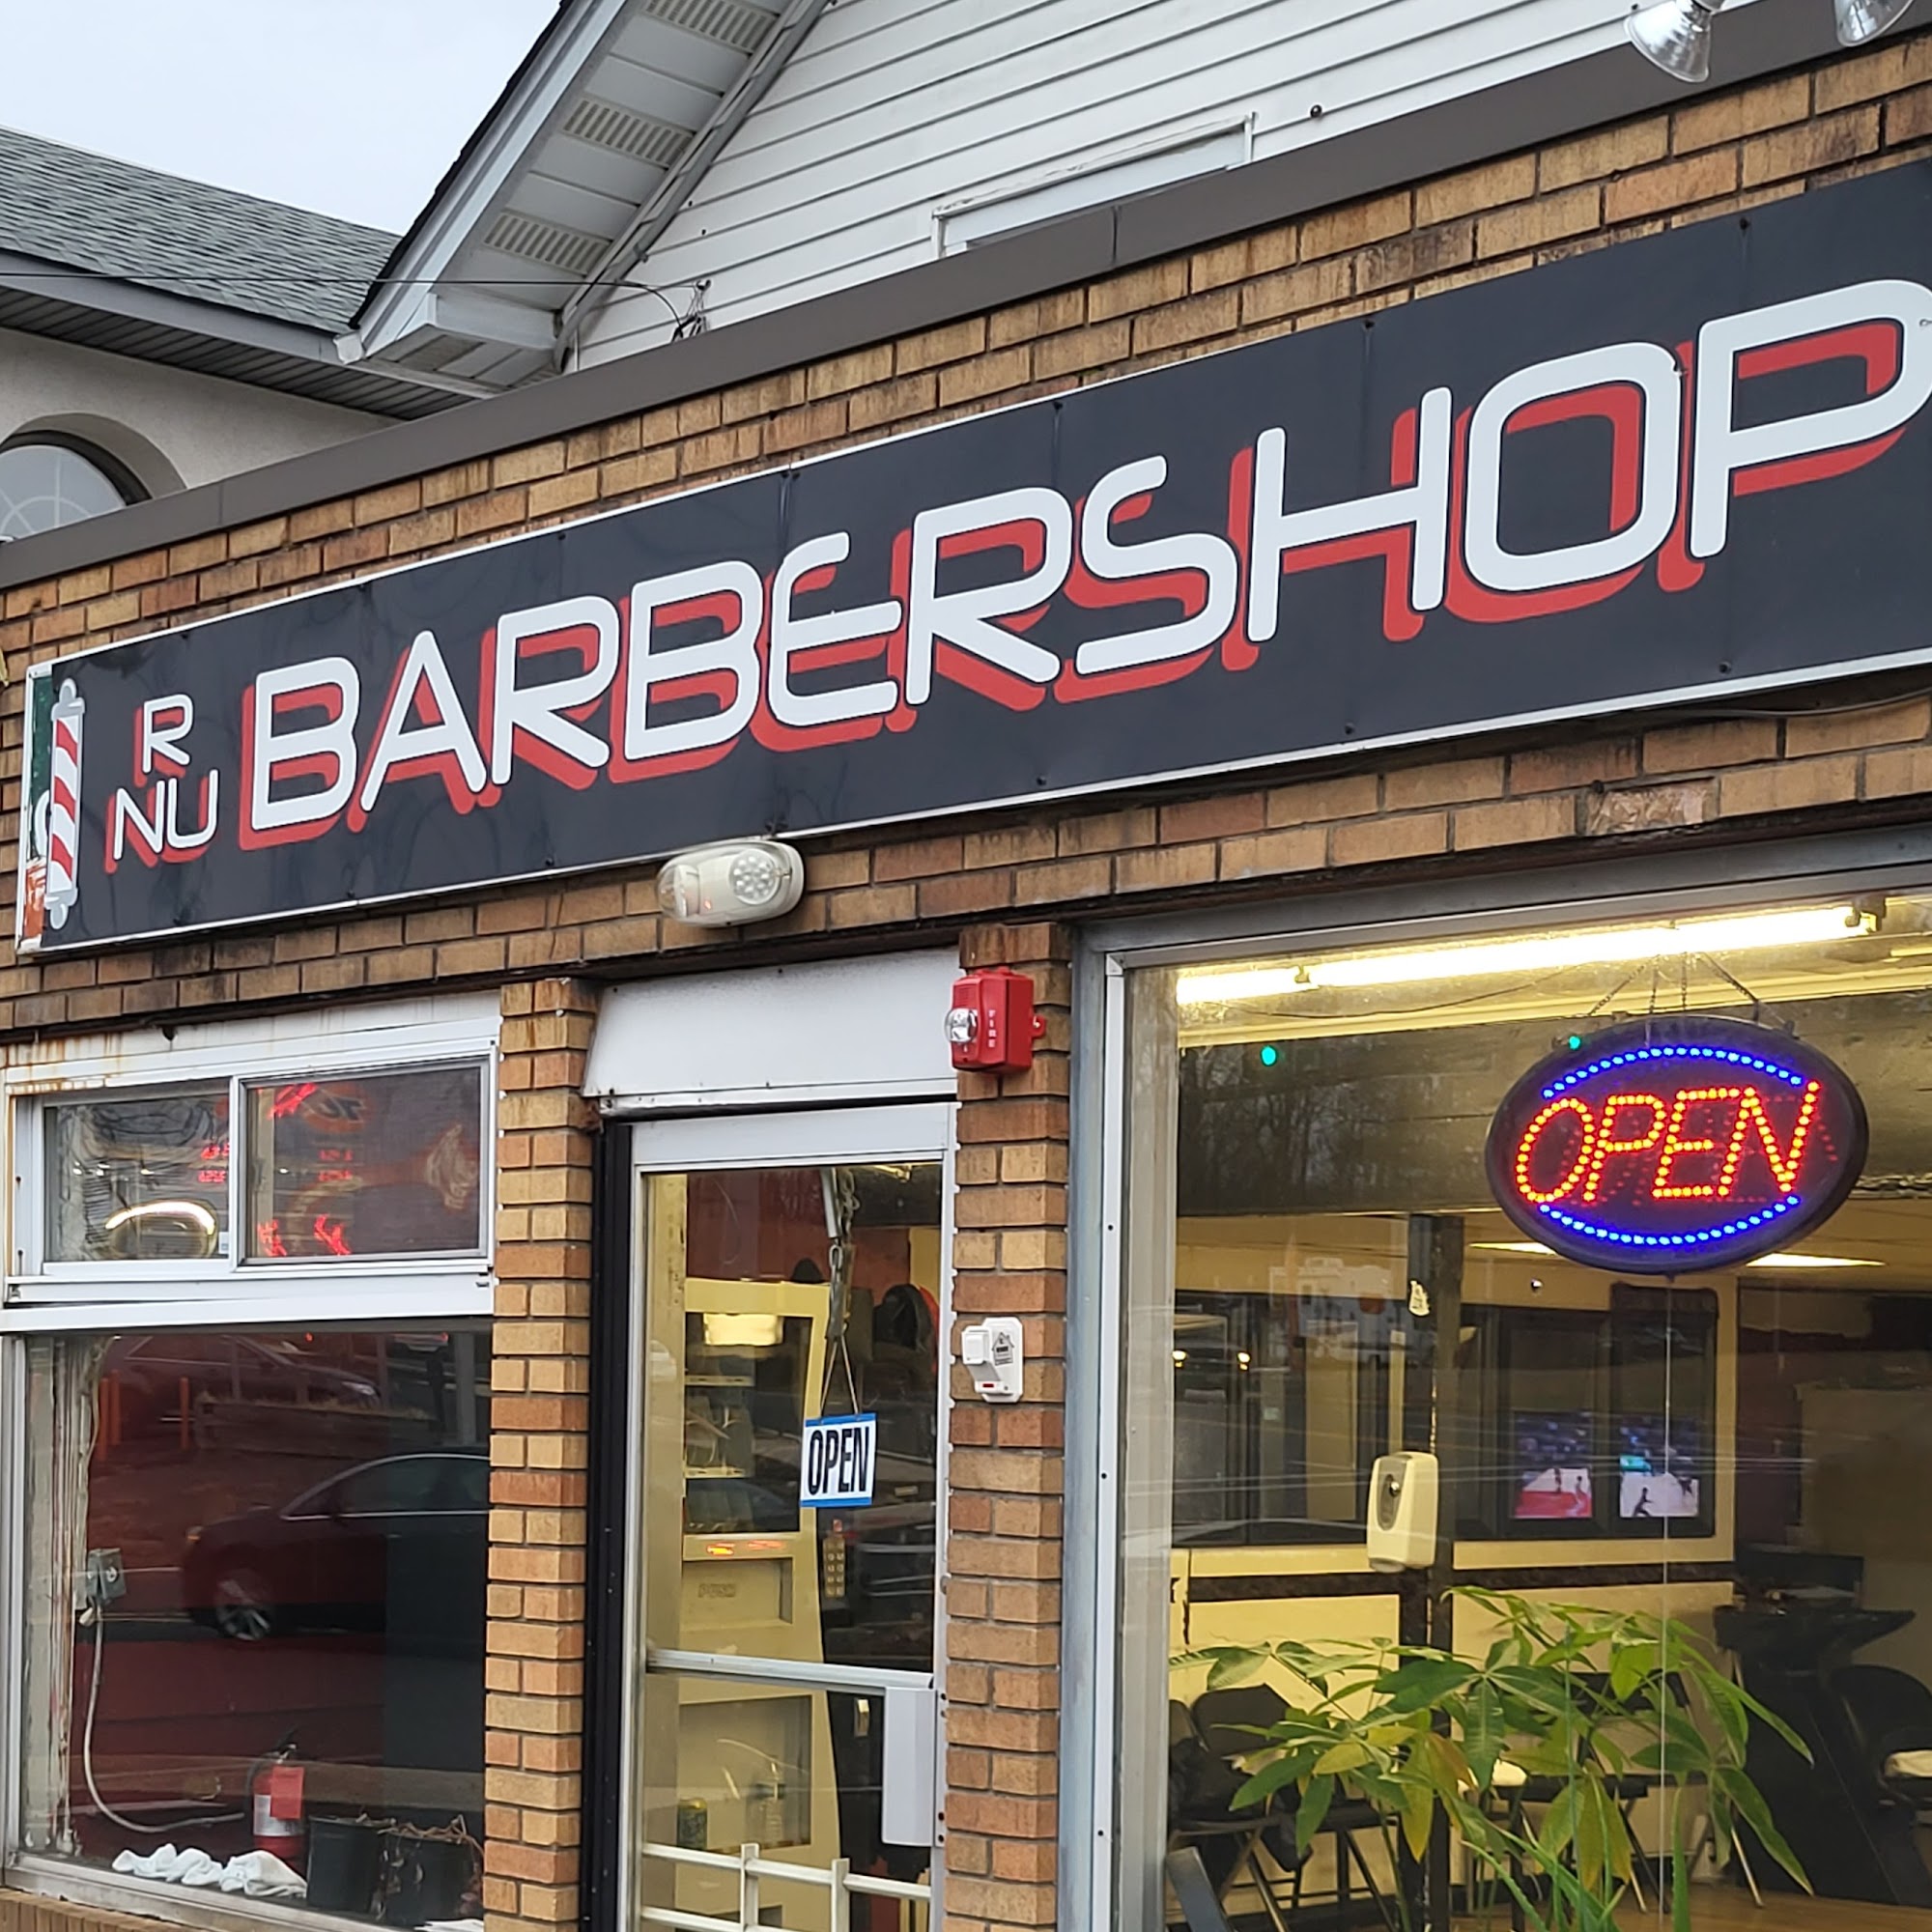 RNU Barber Shop 1030 Old Corlies Ave, Neptune New Jersey 07753